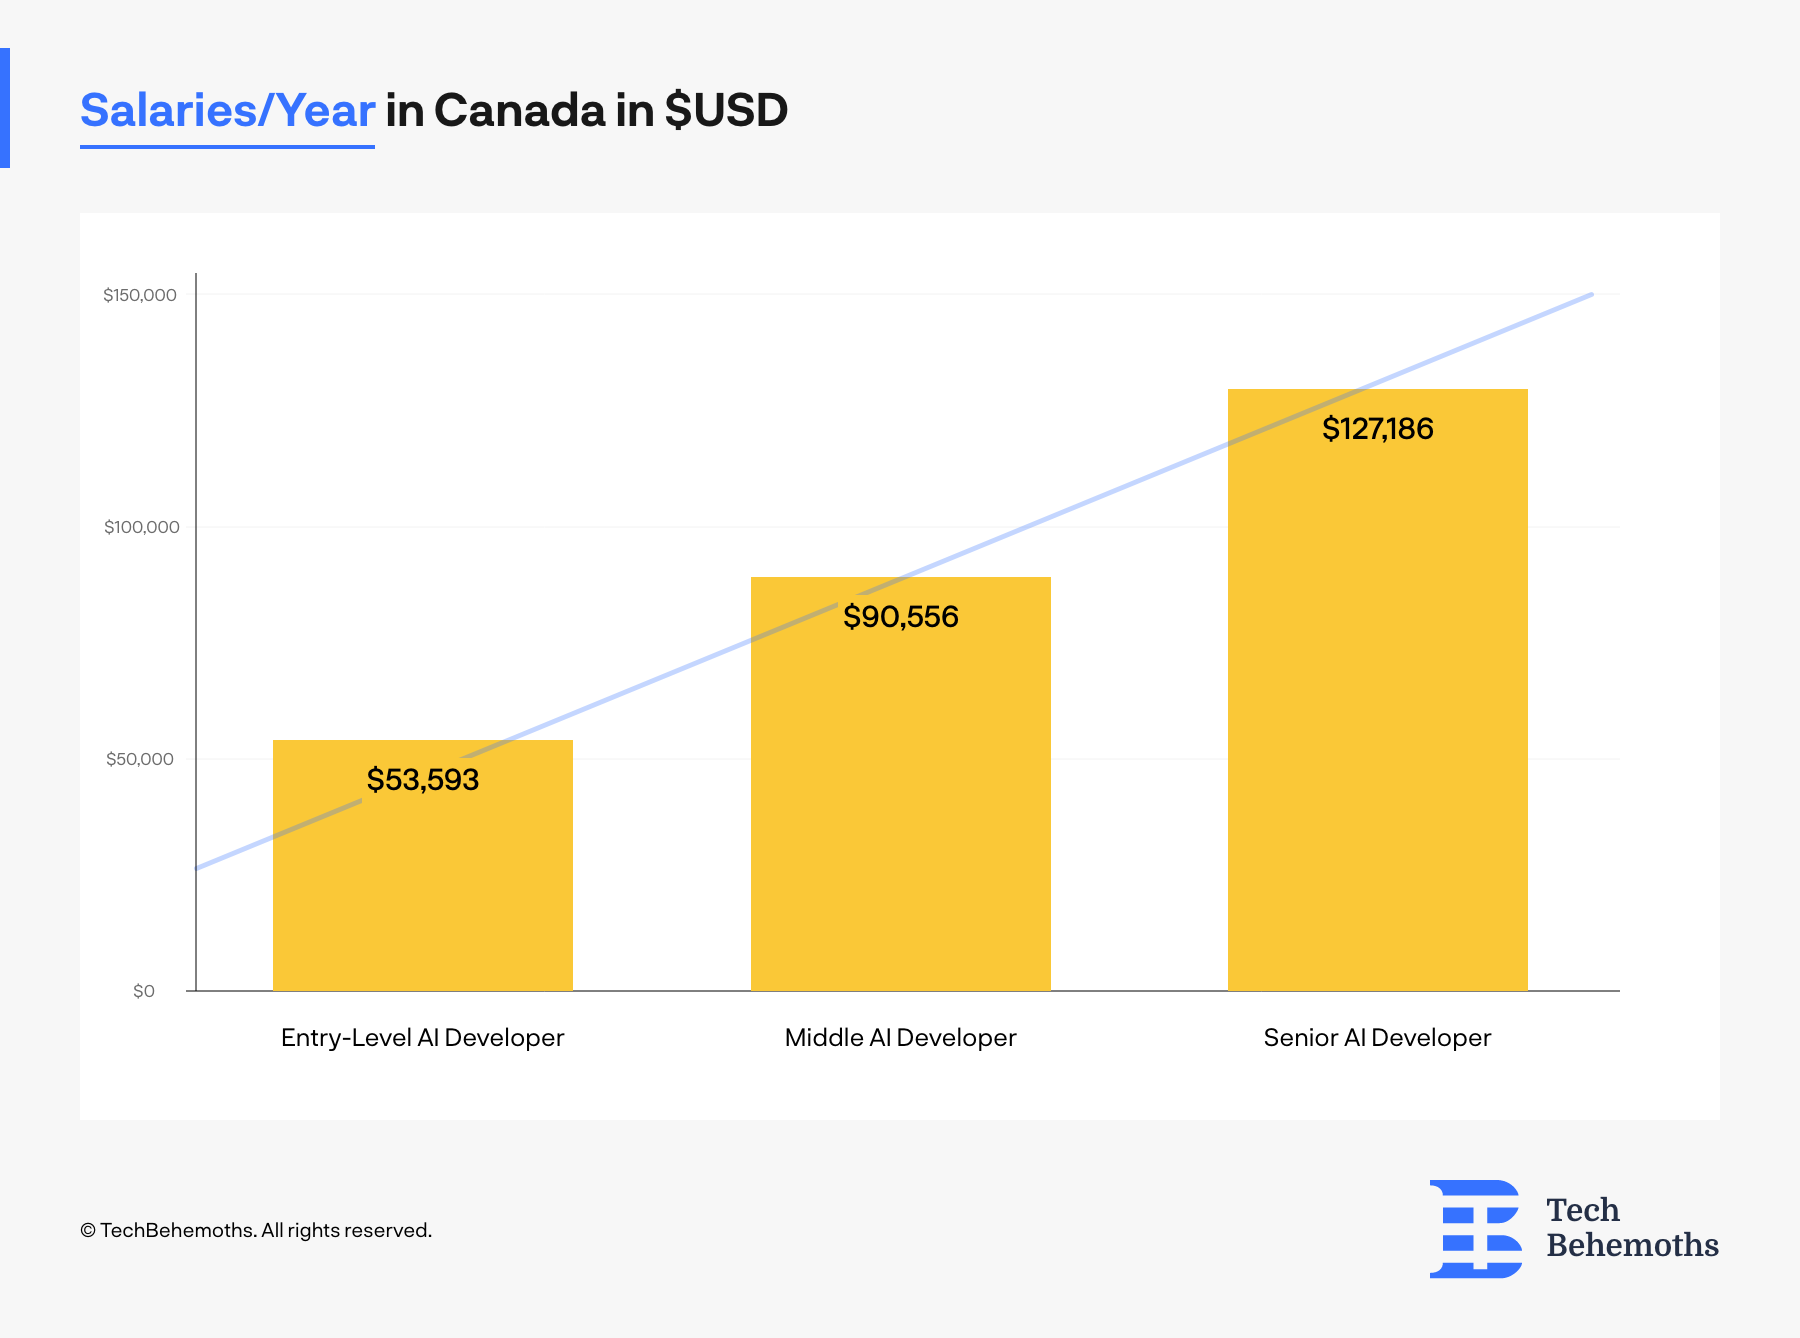 salaries year over year of AI developers in Canada